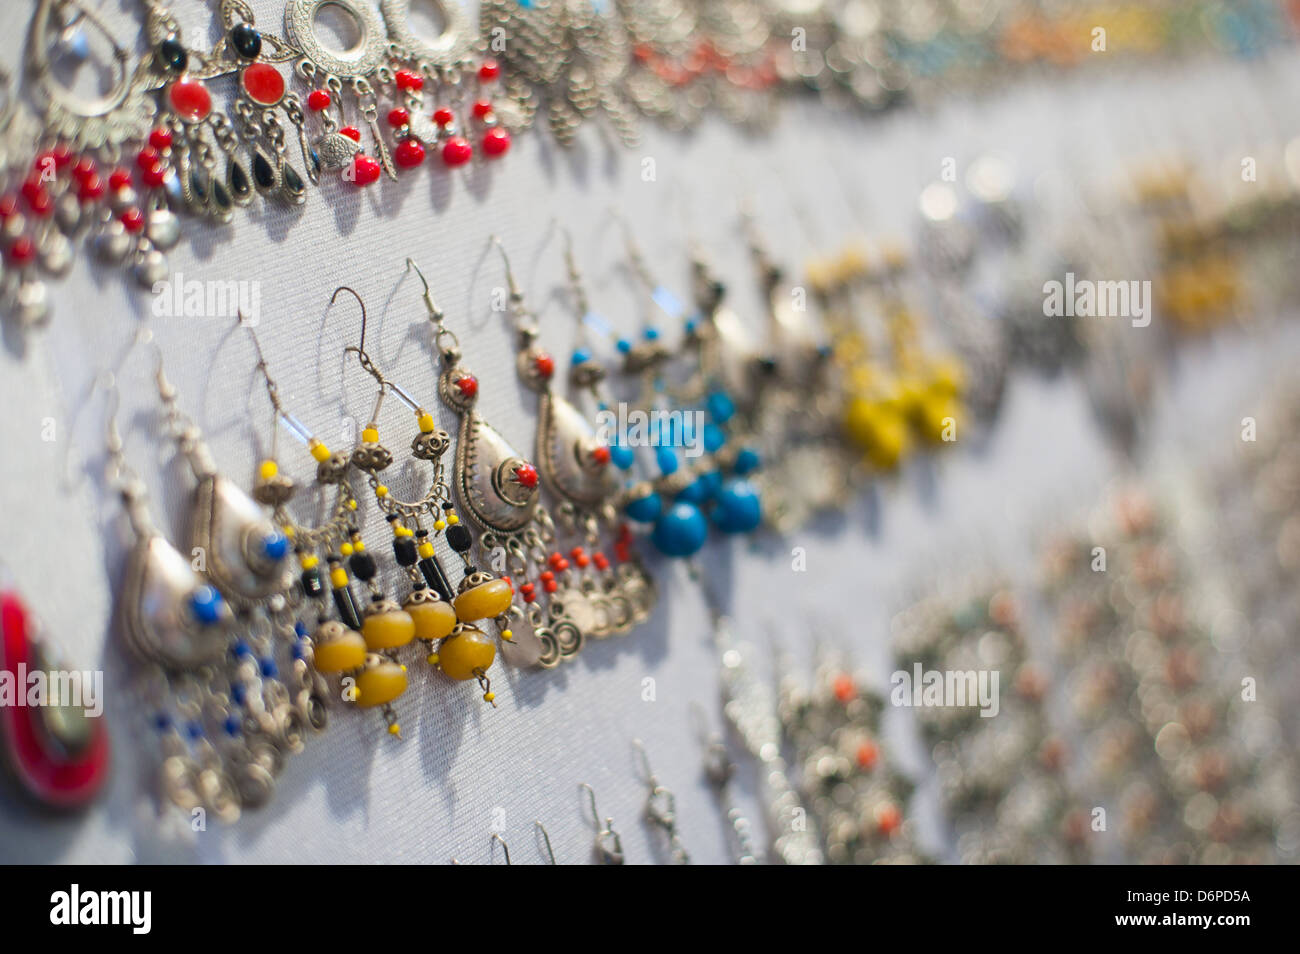 Earrings for sale in Place Djemaa El Fna Square, Marrakech, Morocco, North Africa, Africa Stock Photo